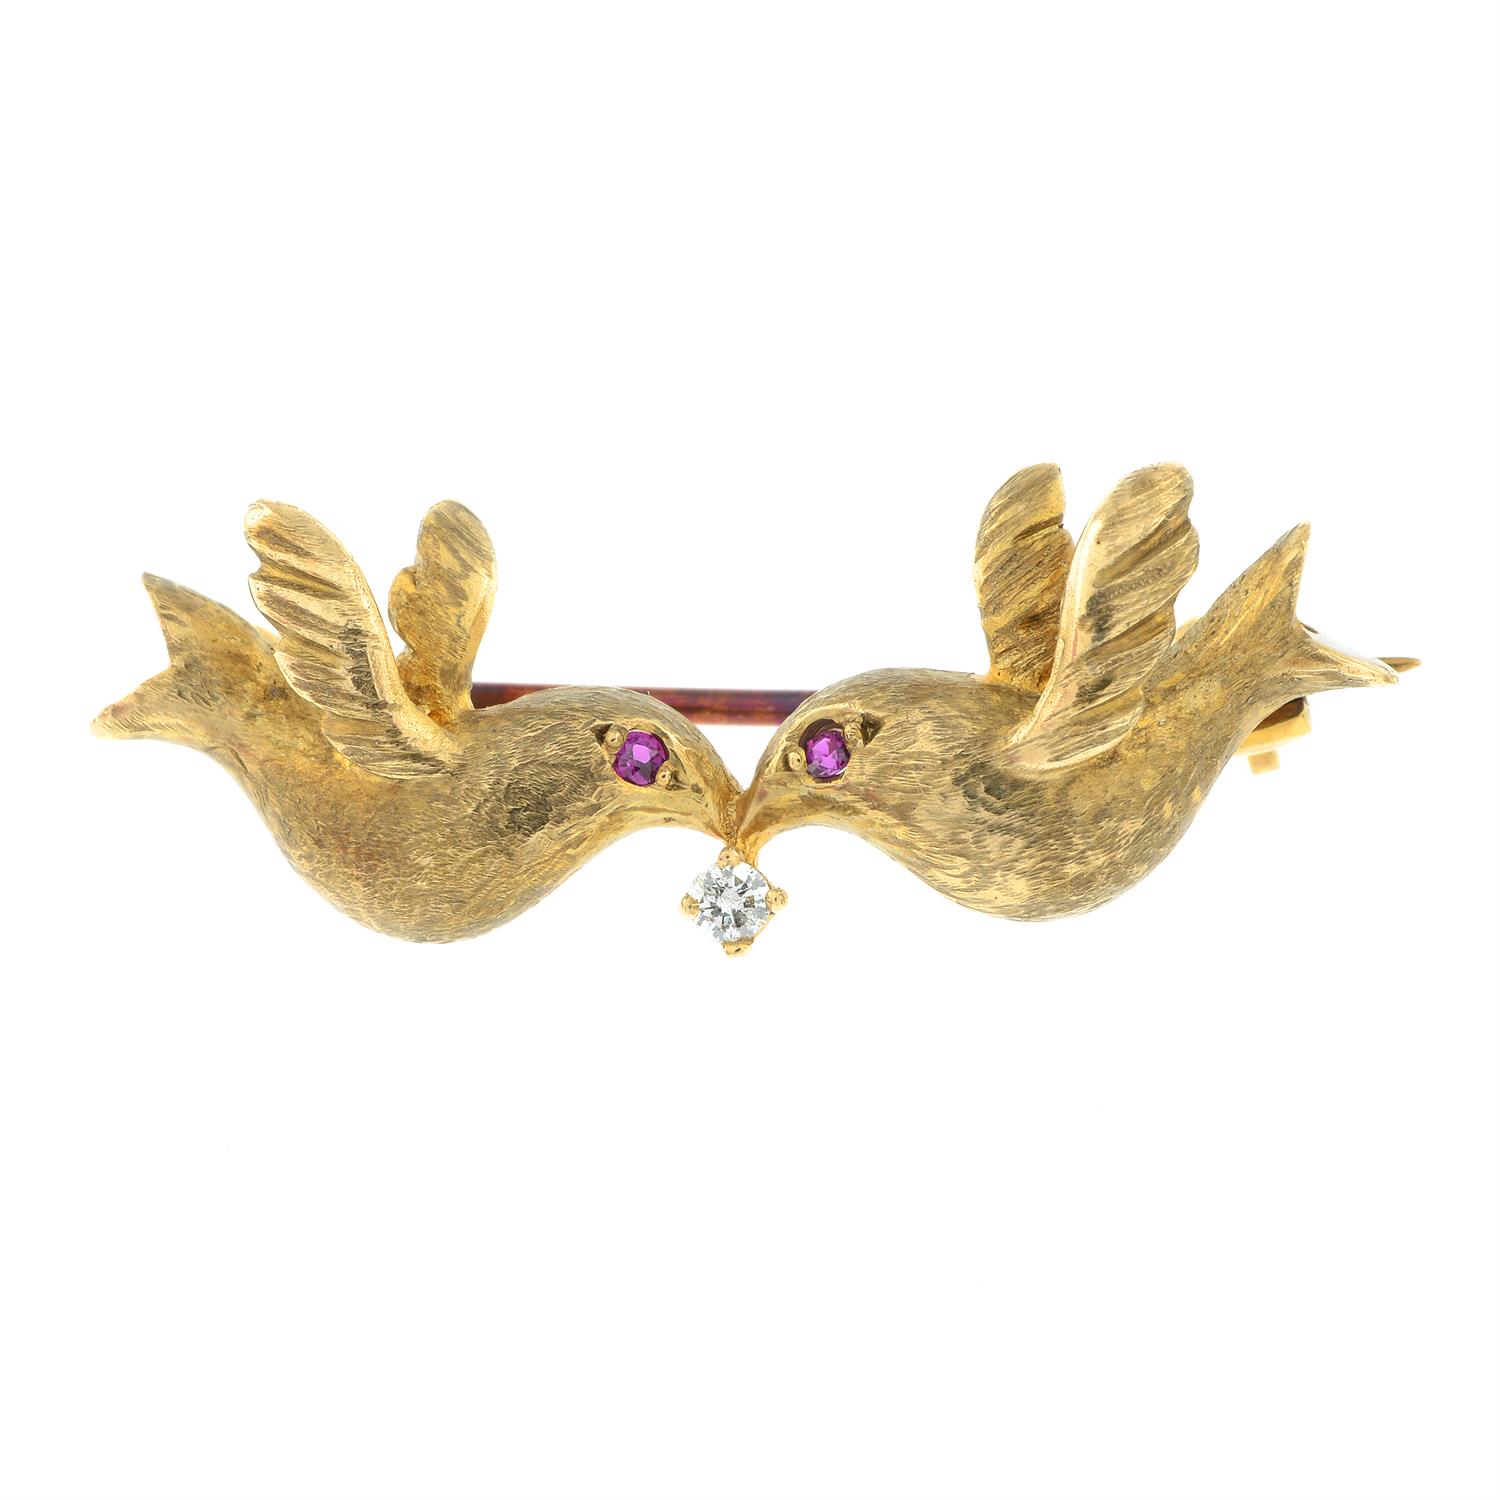 A 9ct gold dove duo brooch, with ruby and diamond highlights.